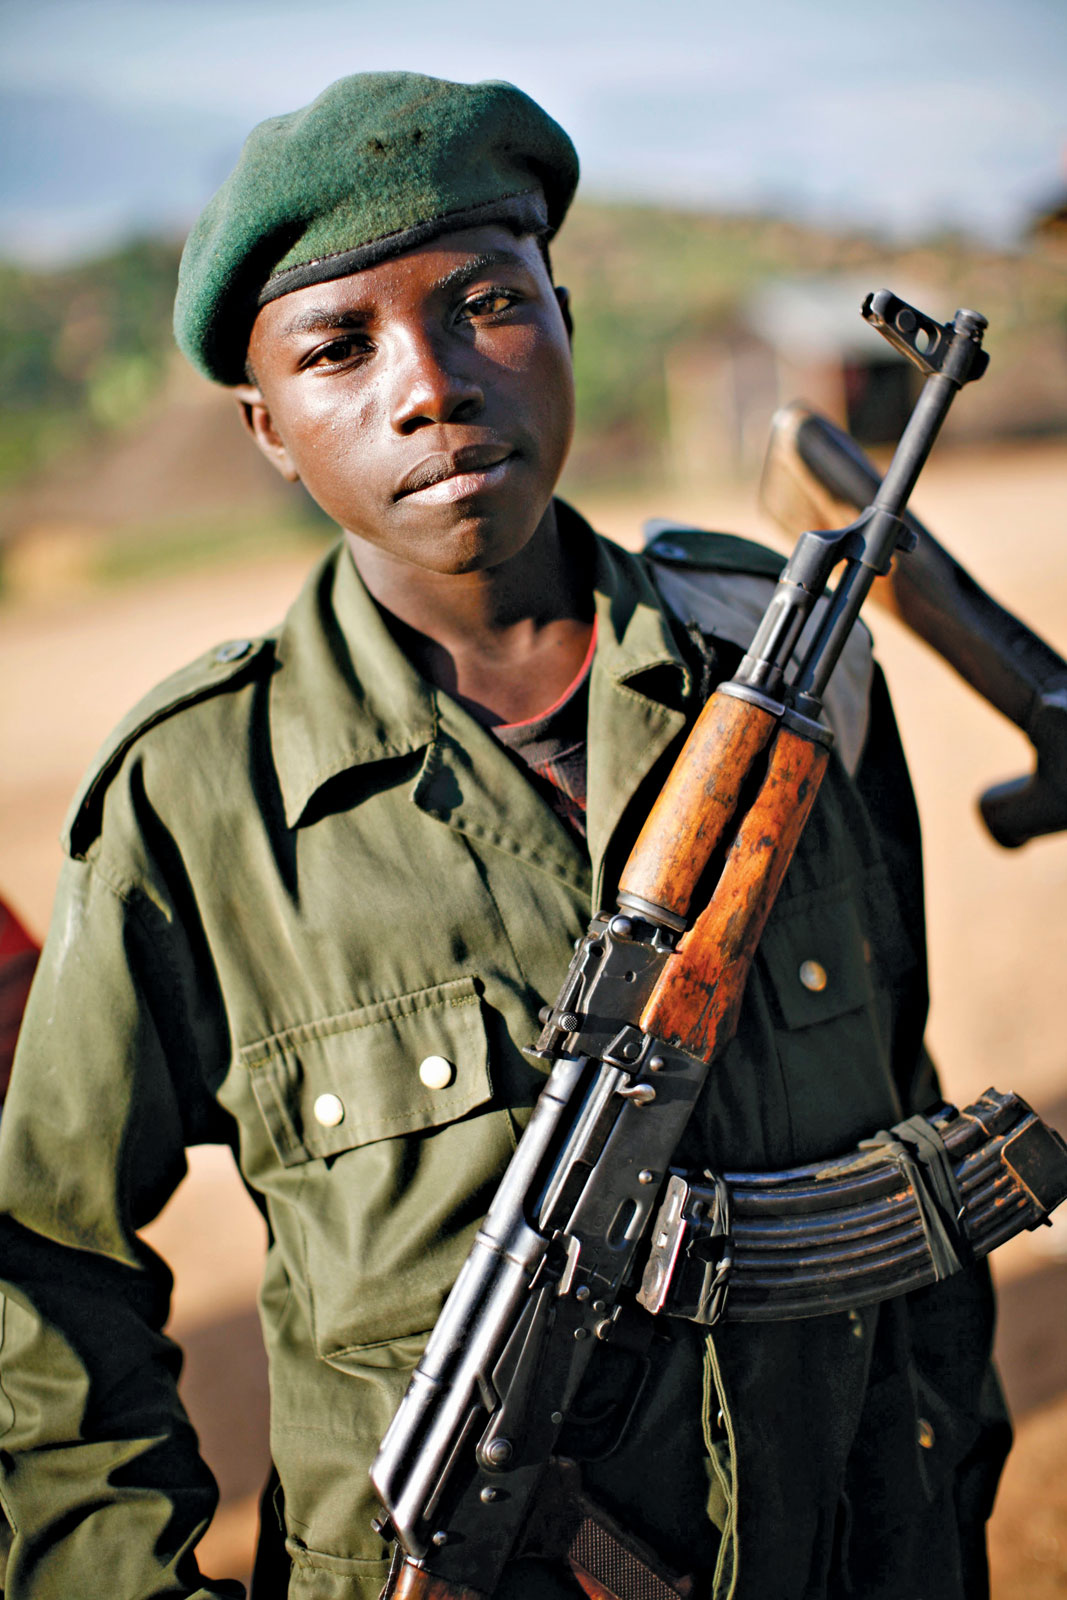 The Issue Of Child Soldiers